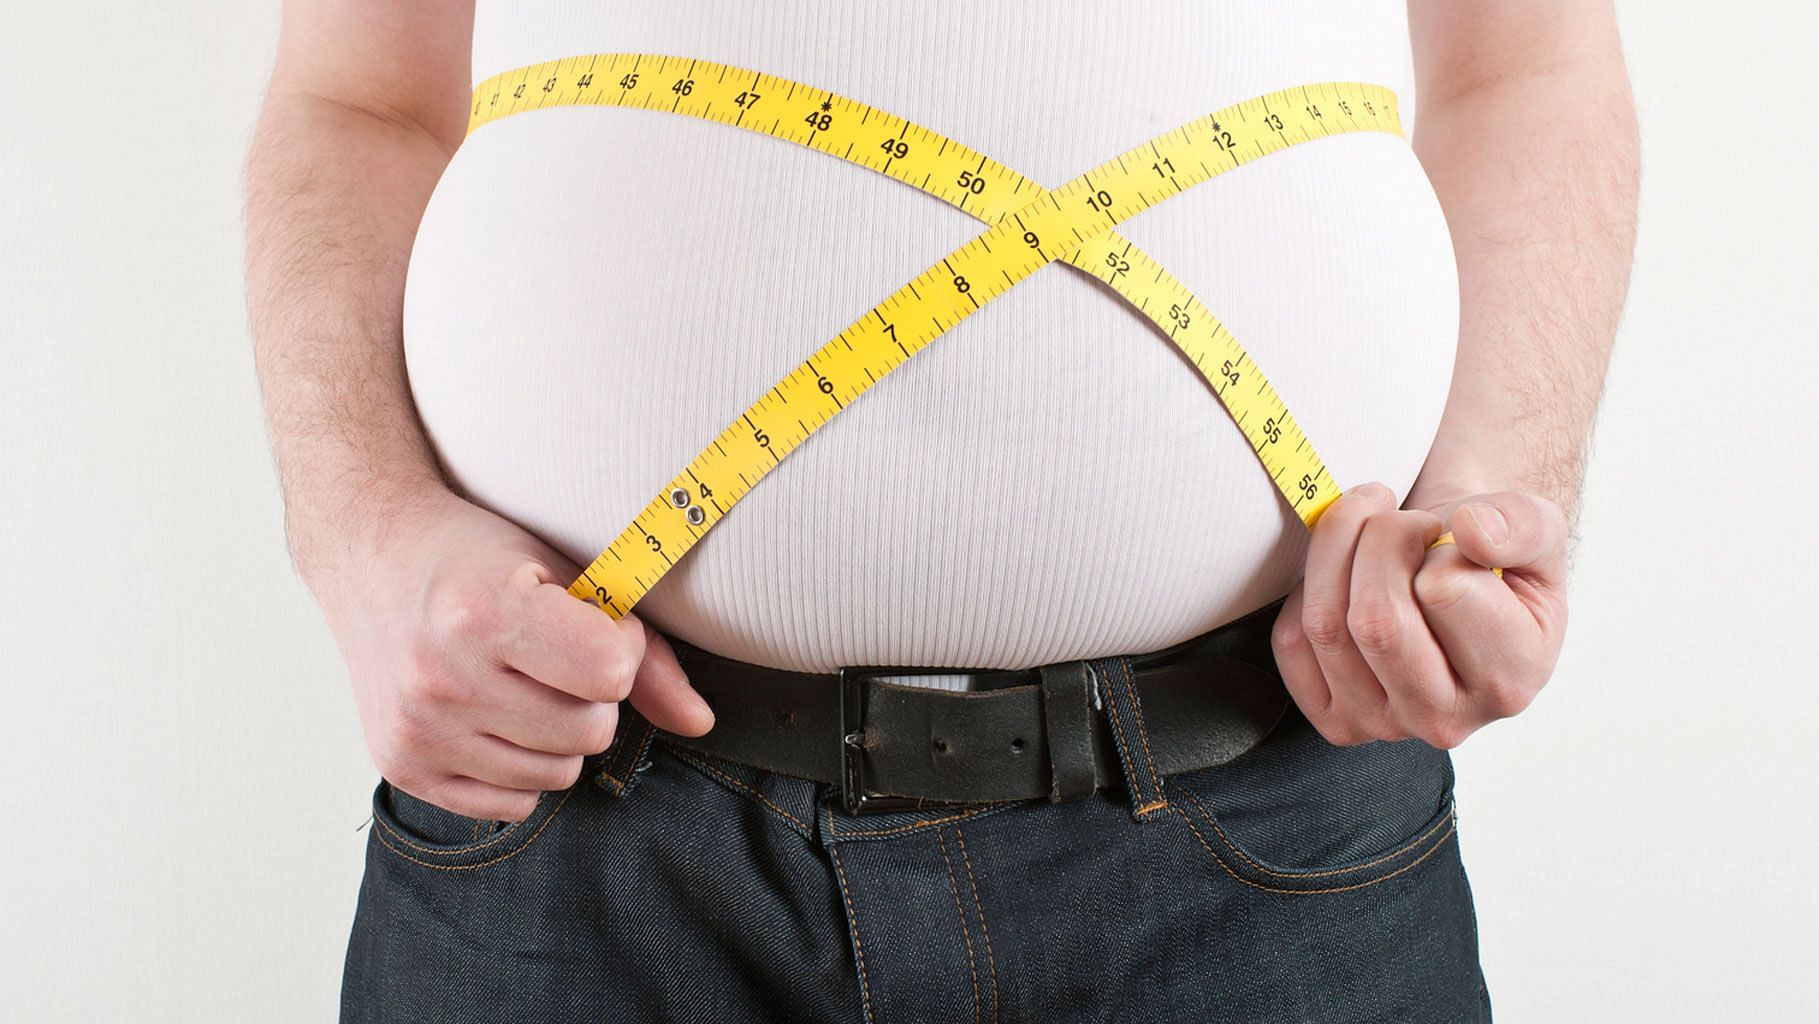 Excess body weight responsible for 1 in 25 cancer cases globally, a new study has found.&nbsp;